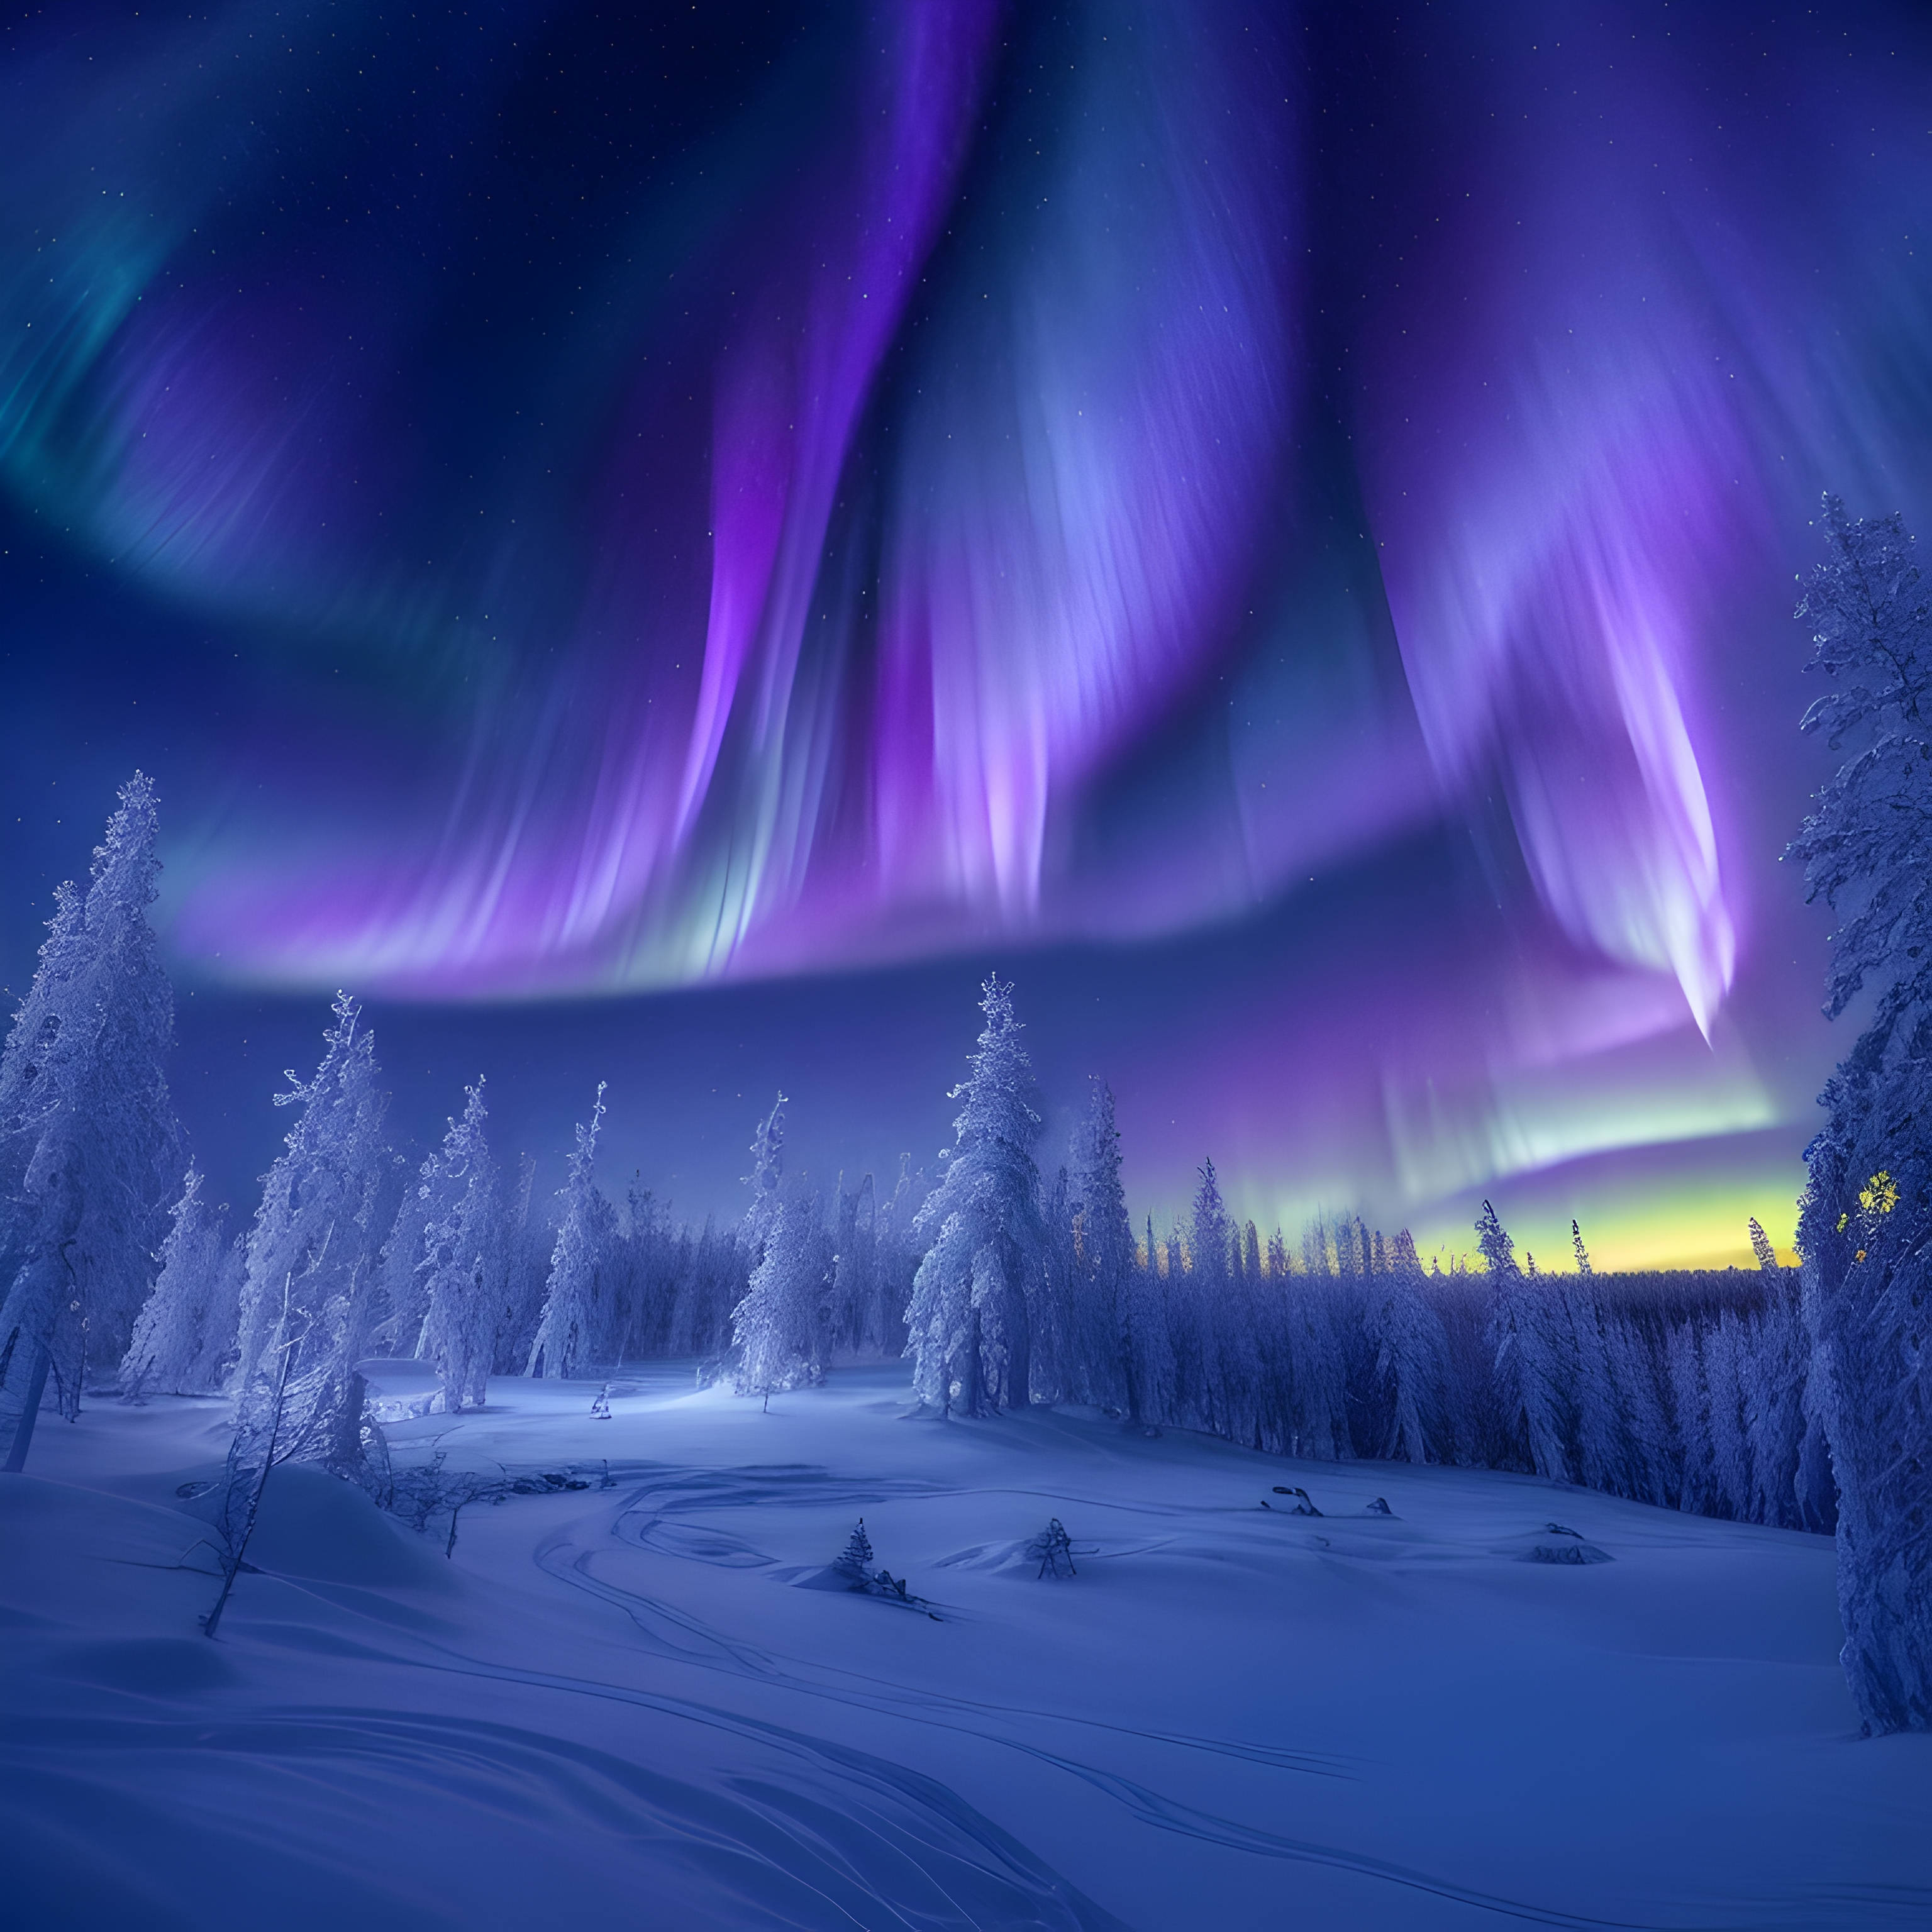 Enchanting pictures of the ethereal glow of Lapland in Finland design finland forest galaxy graphic design illustration landscapes nature nature illustration nature photographe night sky snow snow night sky snowy snowy landscapes